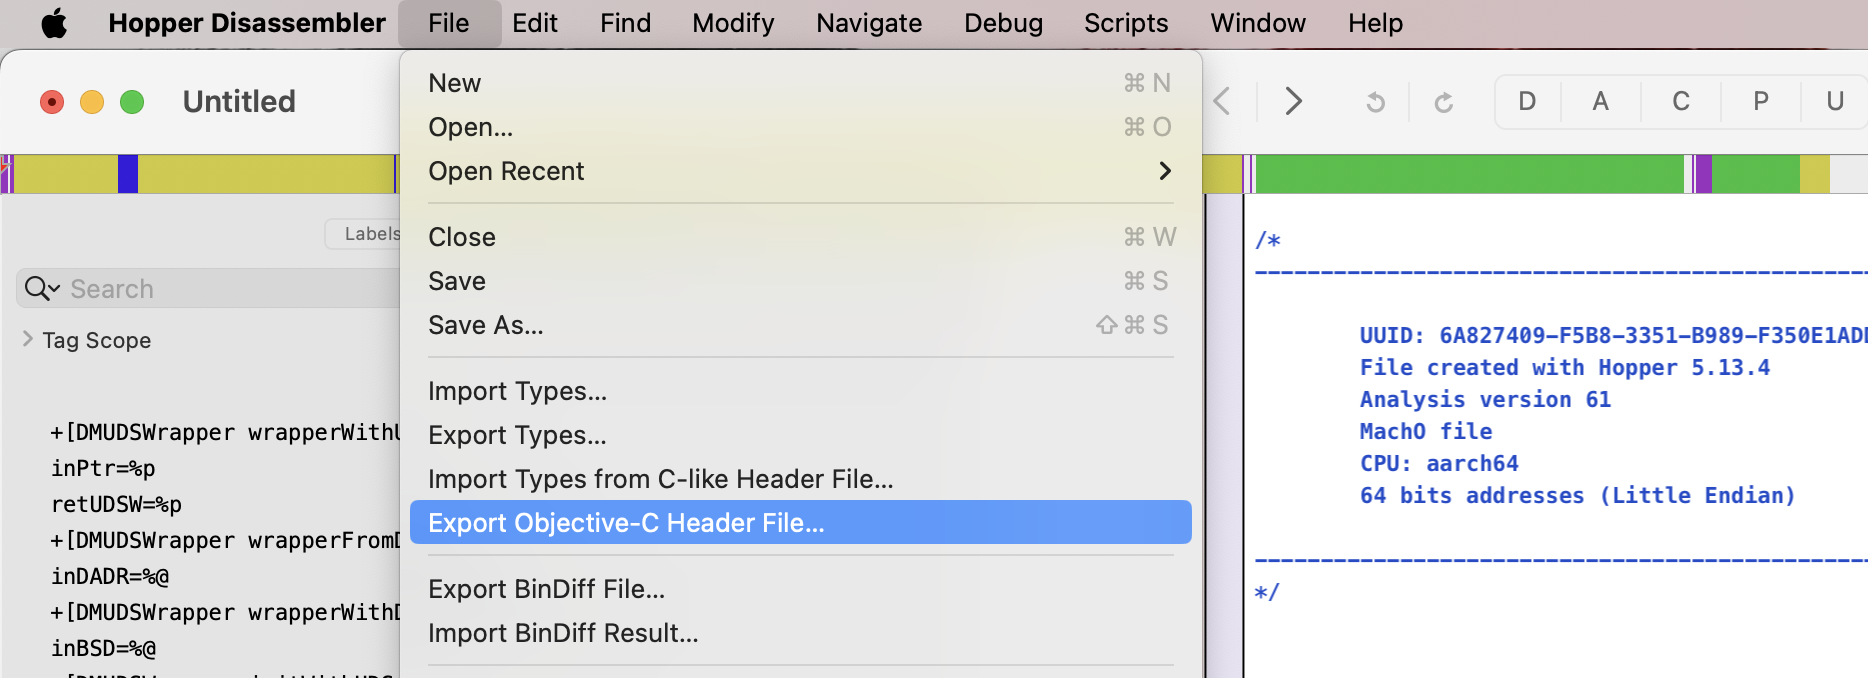 Using Hopper to export the Objective-C headers of DiskManagement